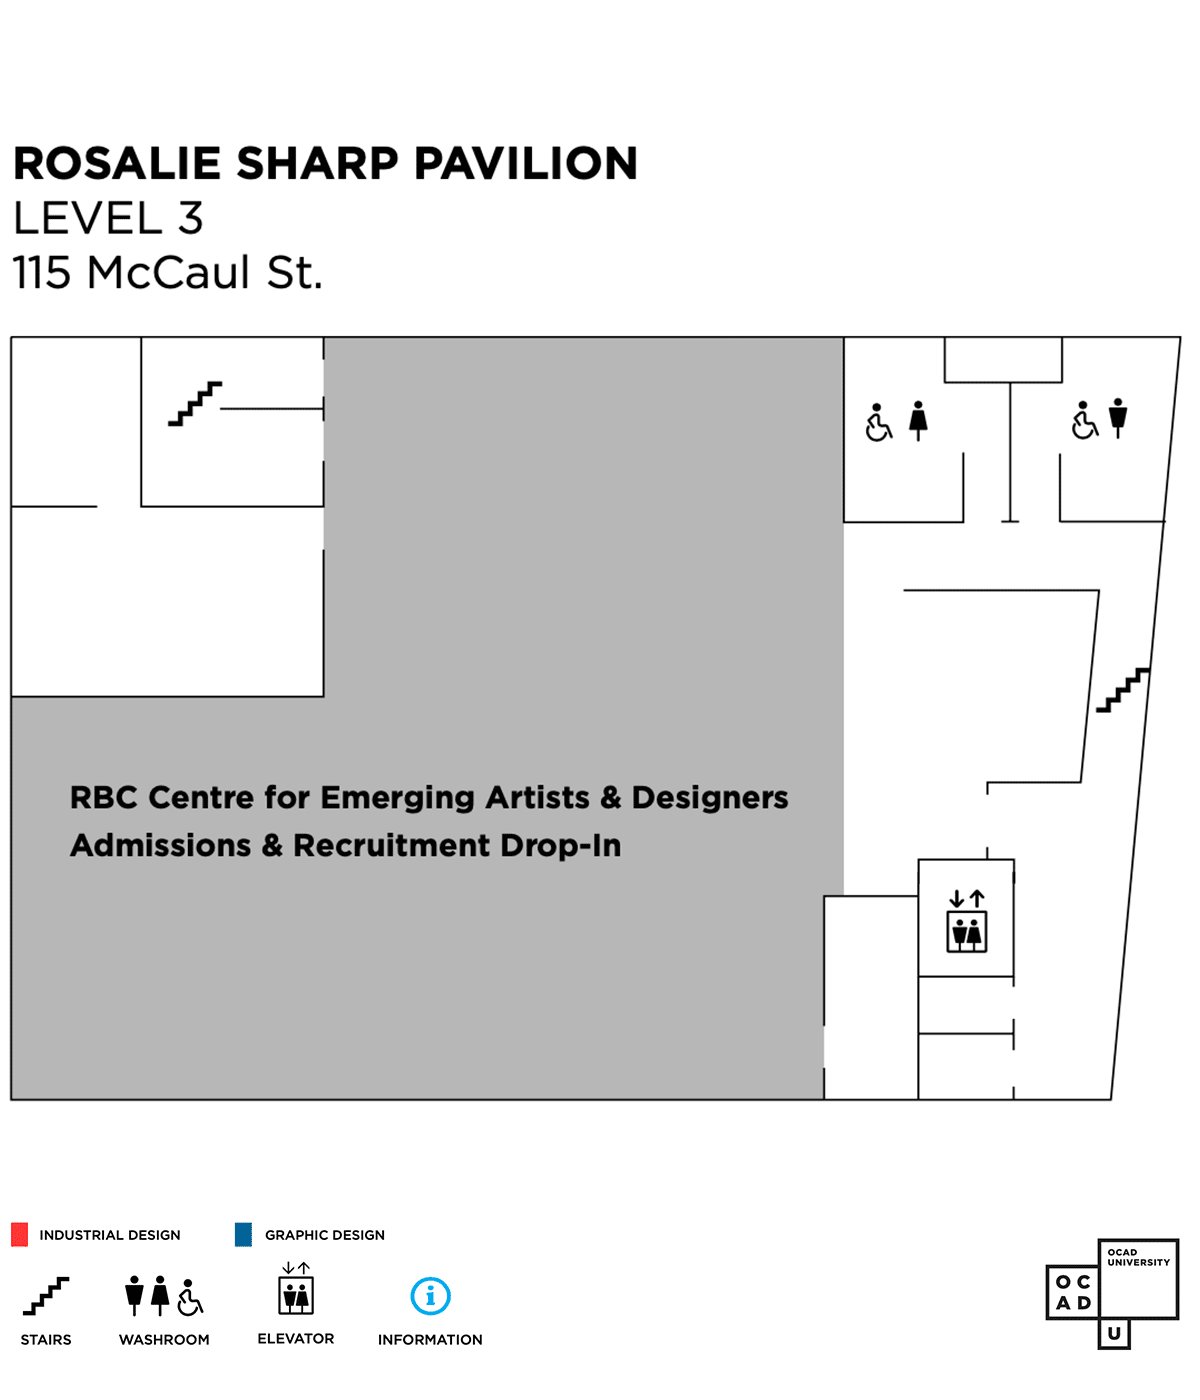 Map of 115 McCaul street level 3. With the RBC Centre for Emerging Artists & Designers Admissions & Recruitment Drop-In.